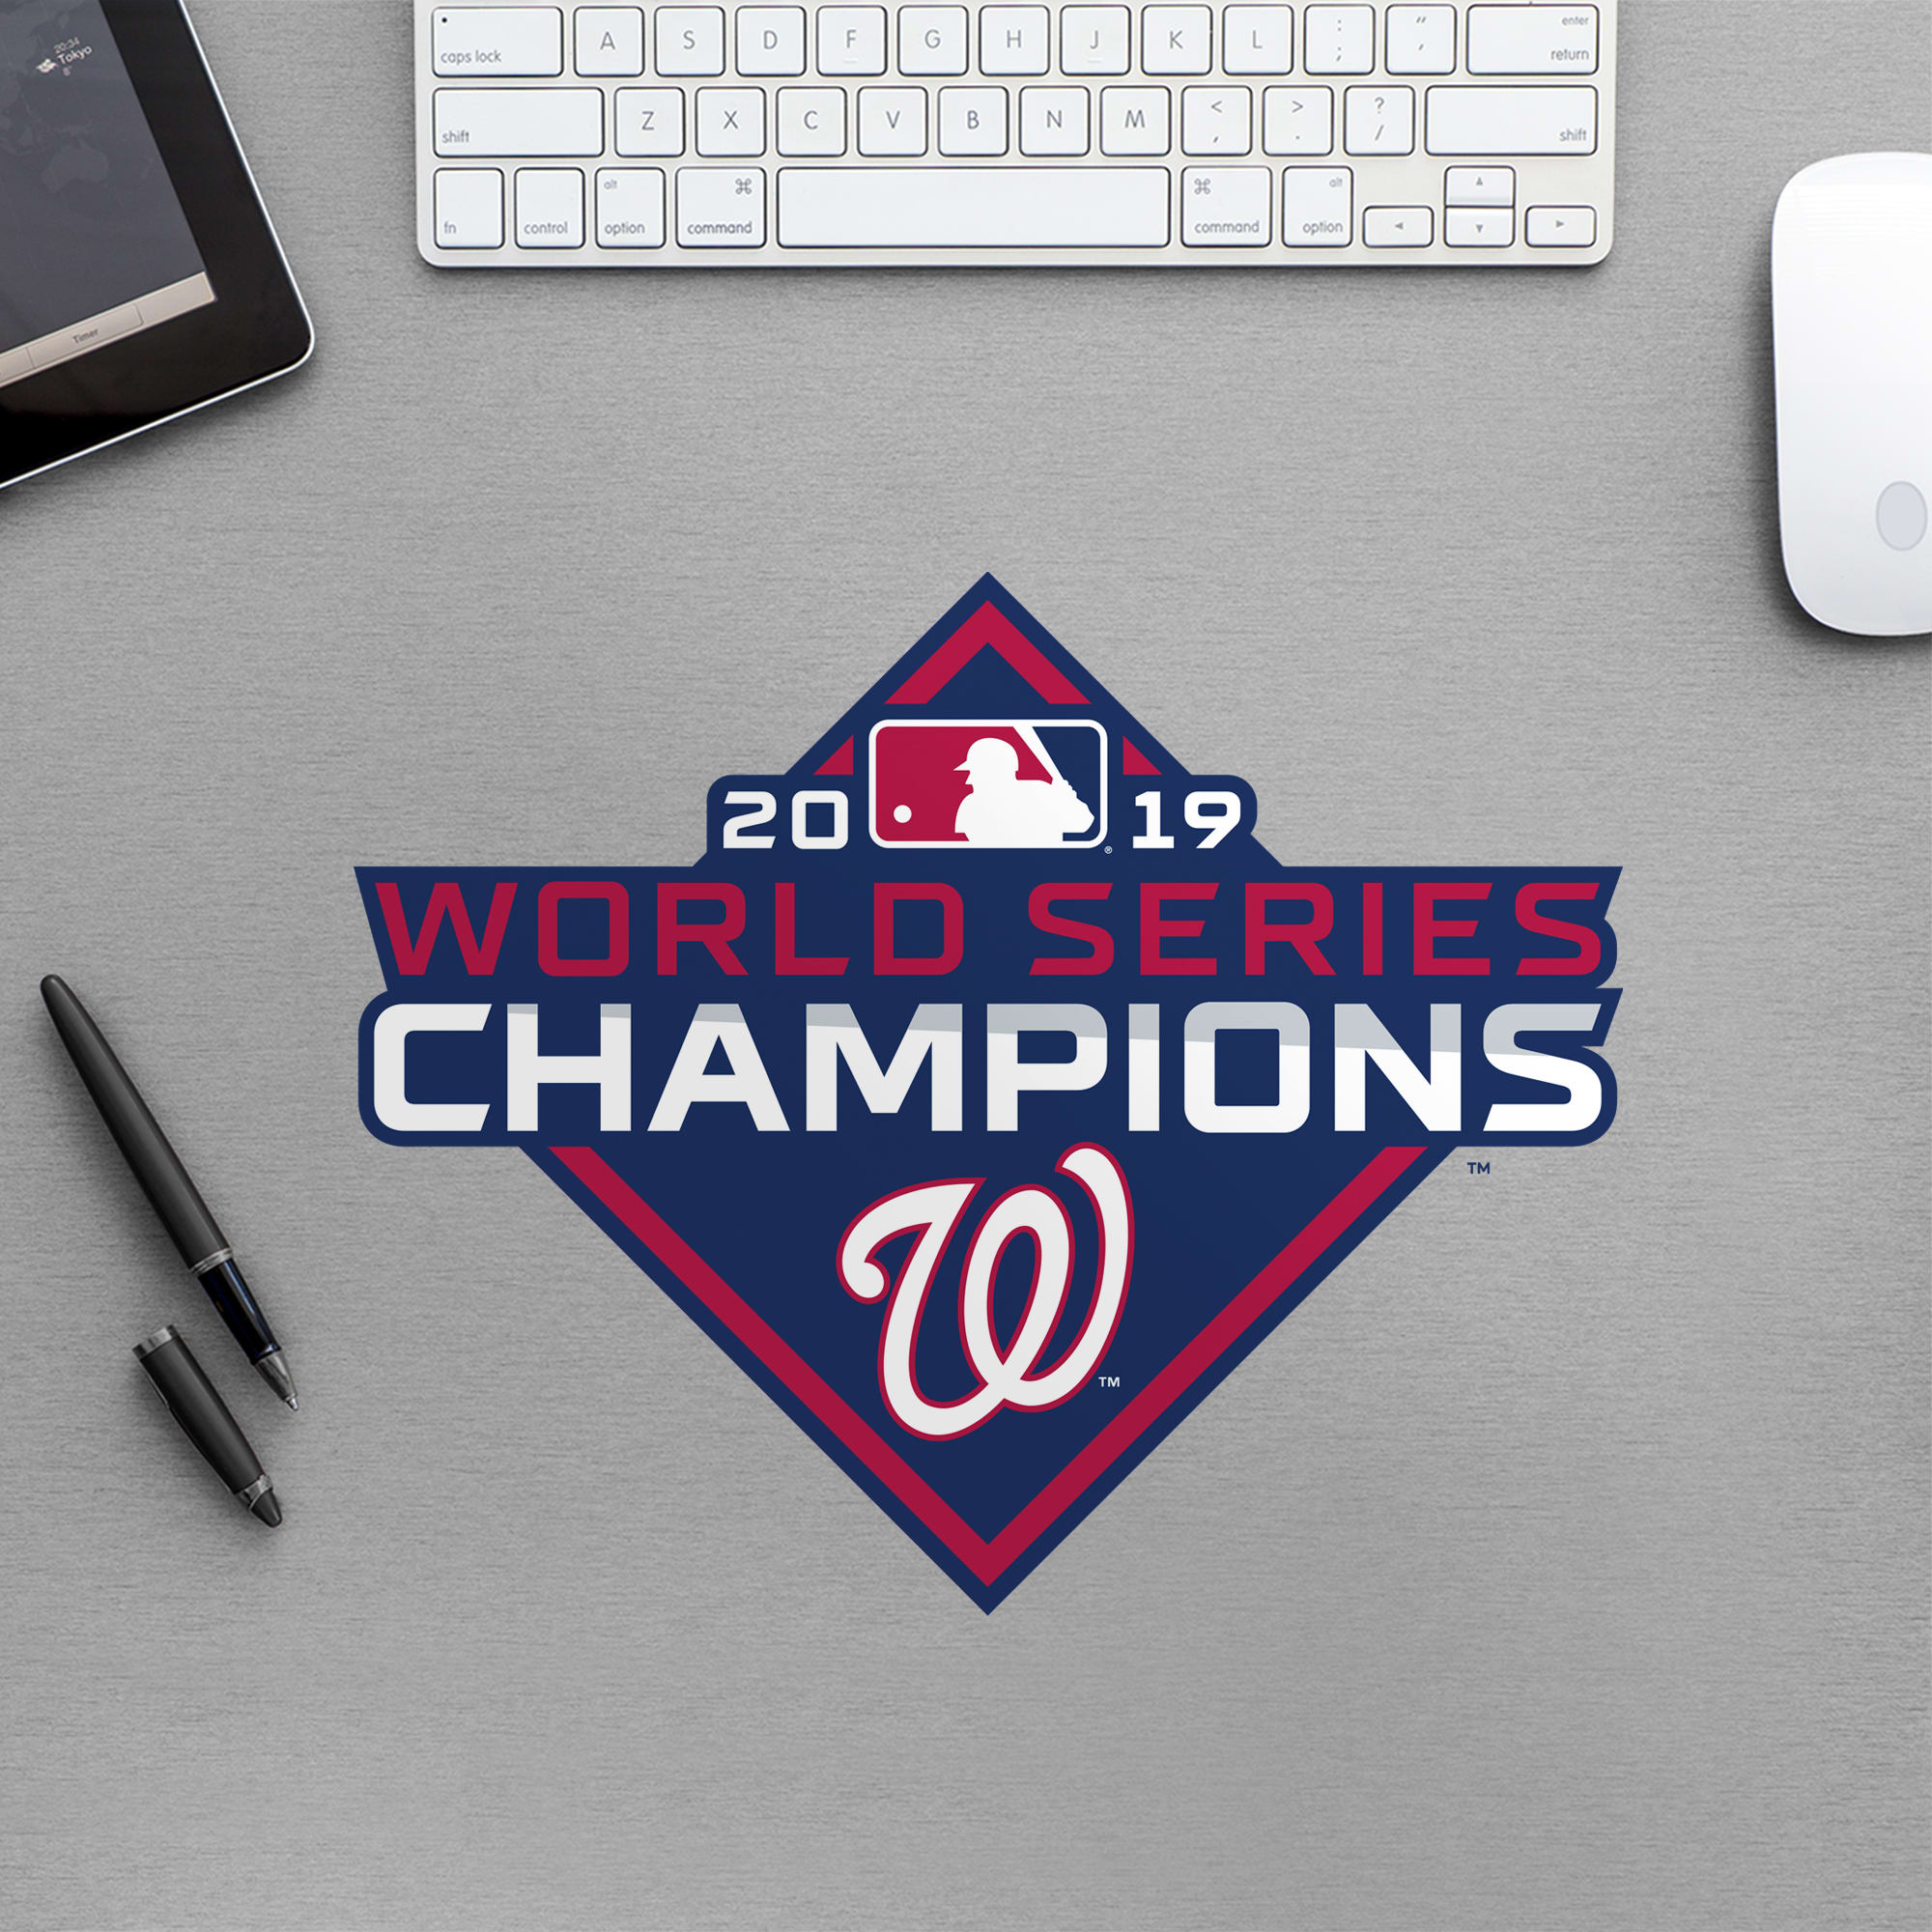 Washington Nationals: 2019 World Series Champions Logo - Officially Licensed MLB Removable Wall Decal Large by Fathead | Vinyl